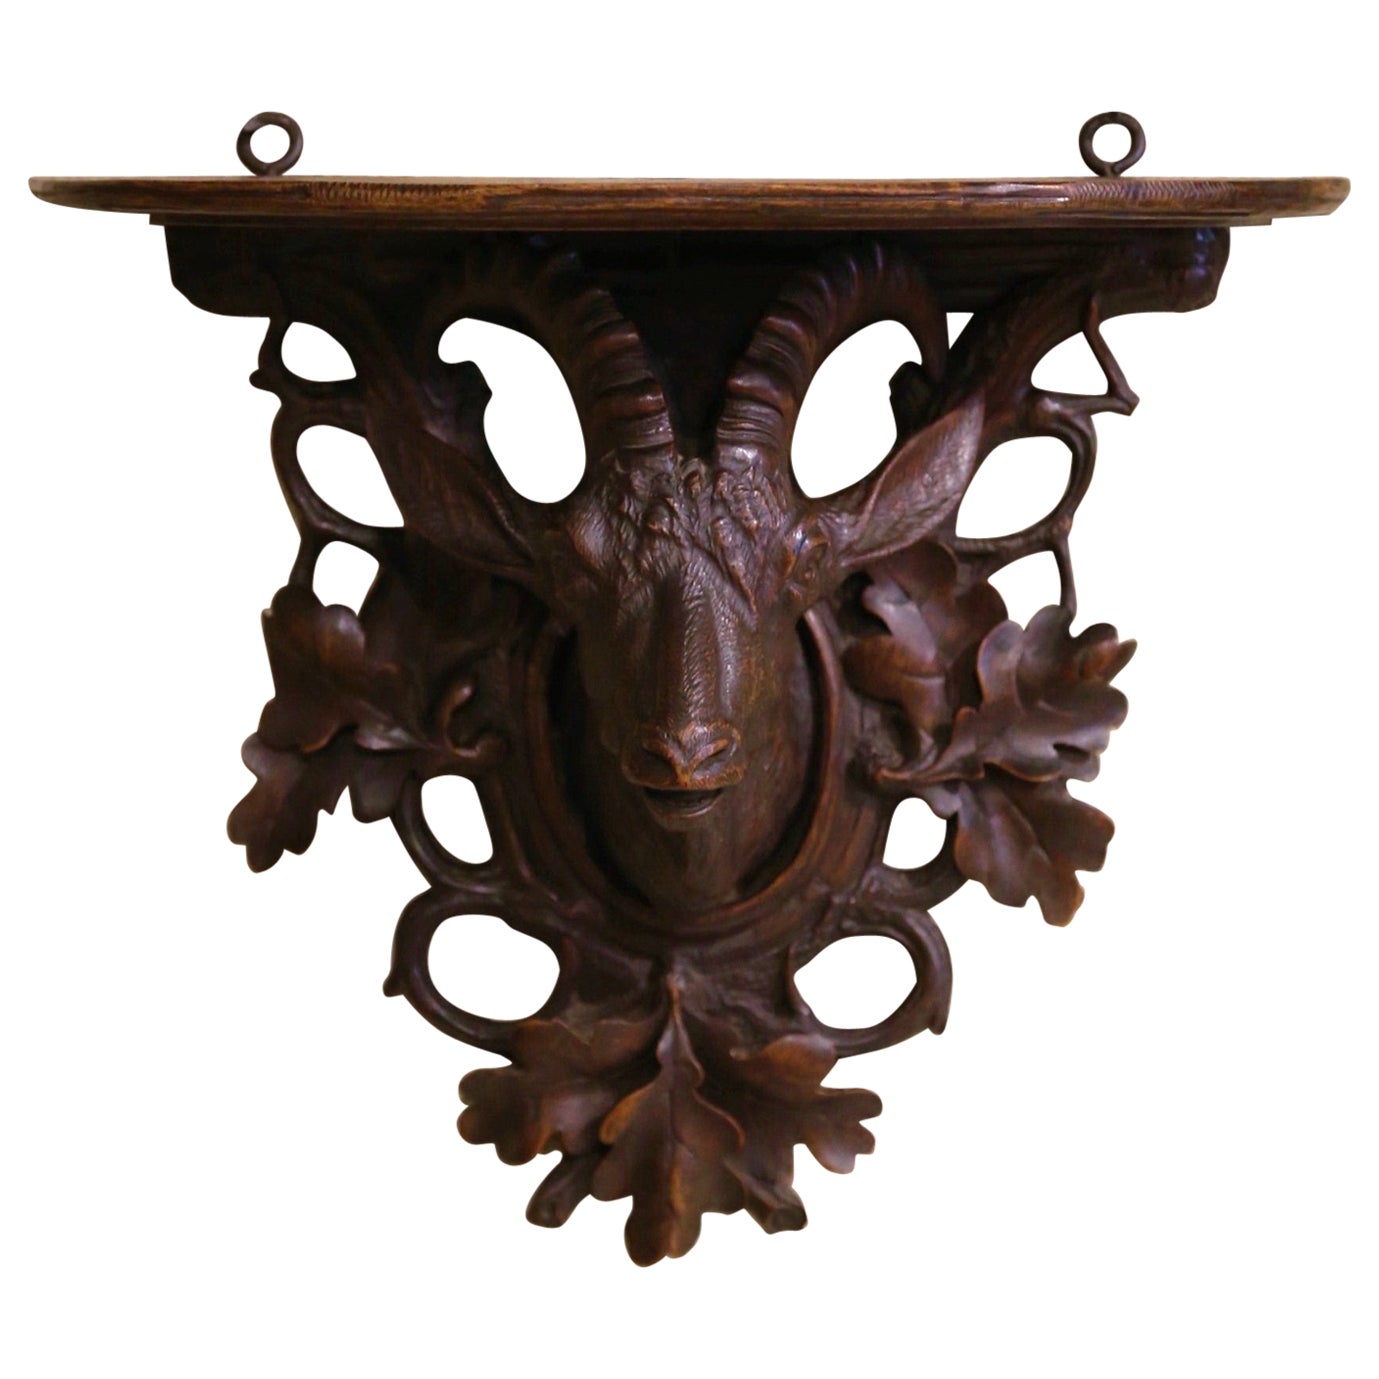 19th Century French Black Forest Carved Walnut Hanging Shelf with Deer Motif